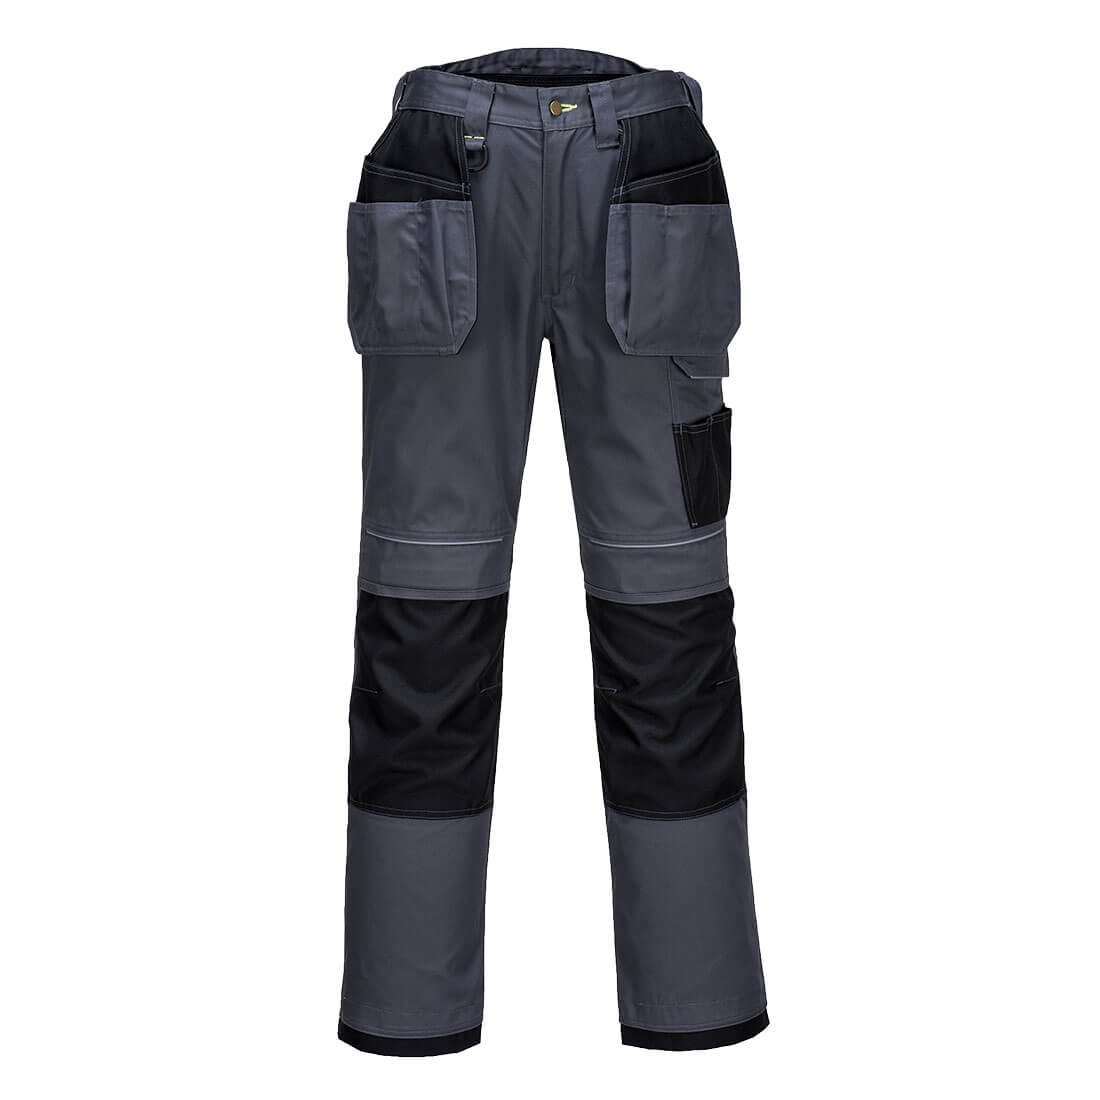 Photo of Pw3 Mens Urban Holster Work Trousers Grey / Black 34